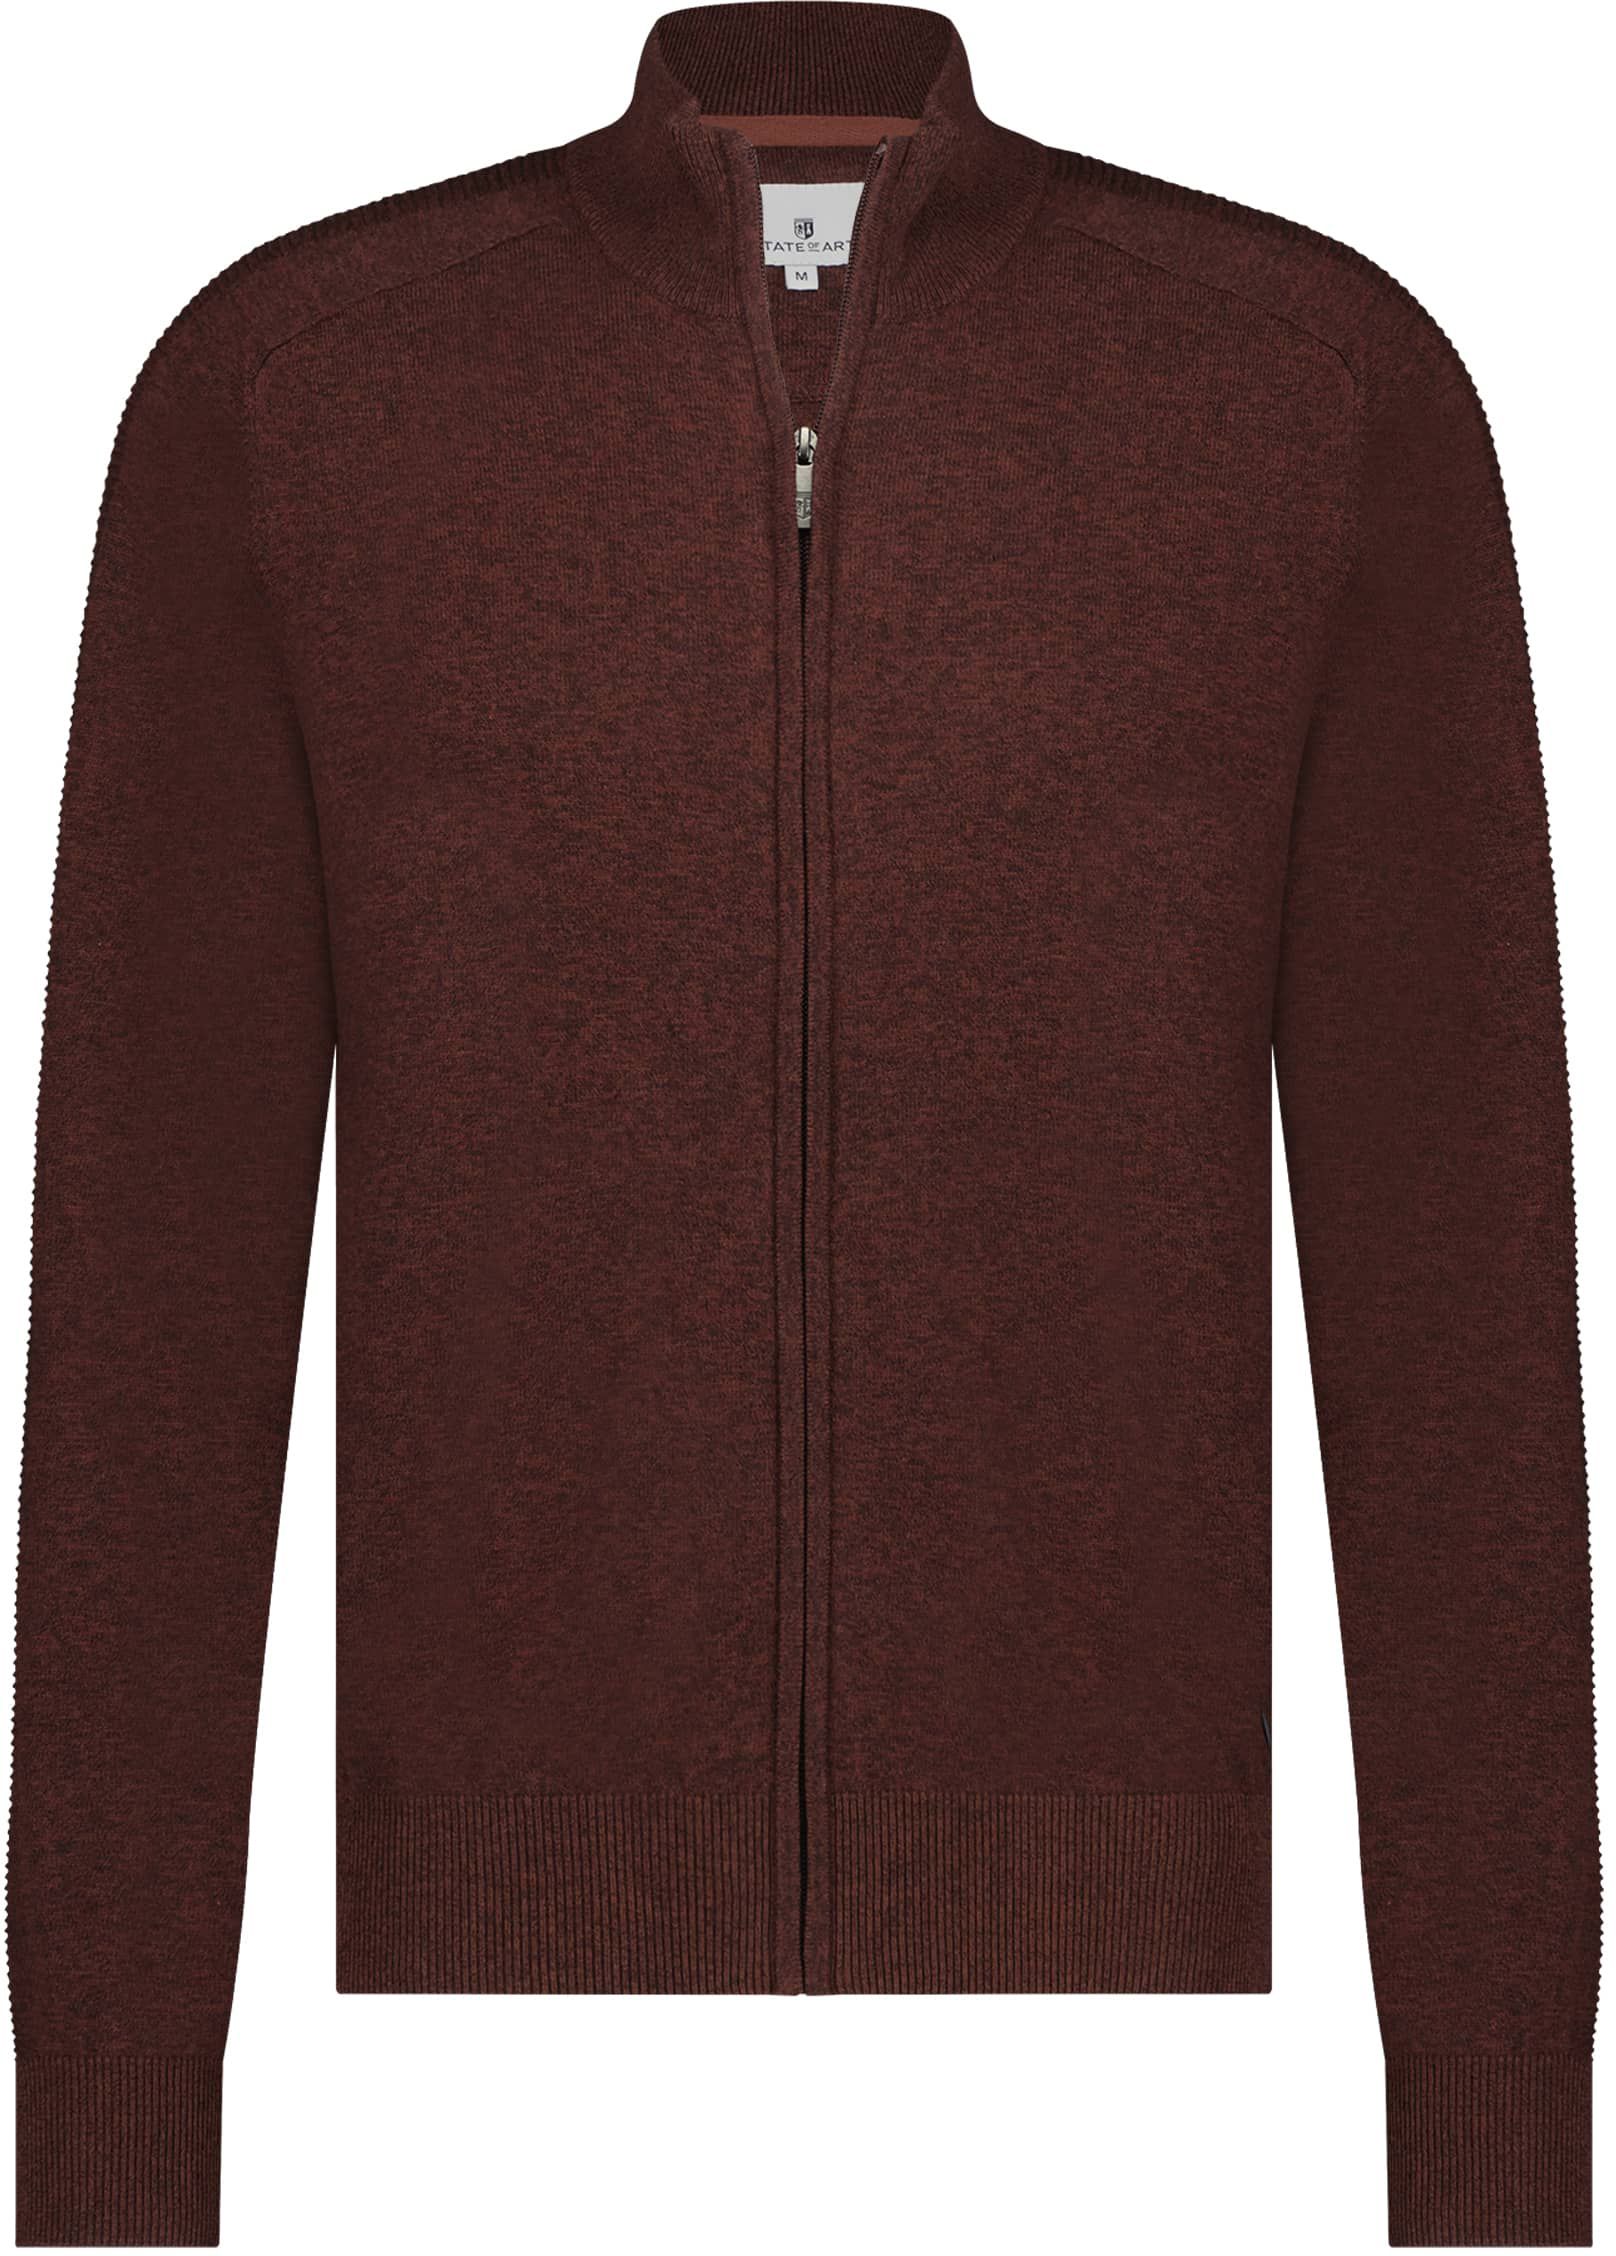 State Of Art Cardigan Plain Brique Brown Red size L